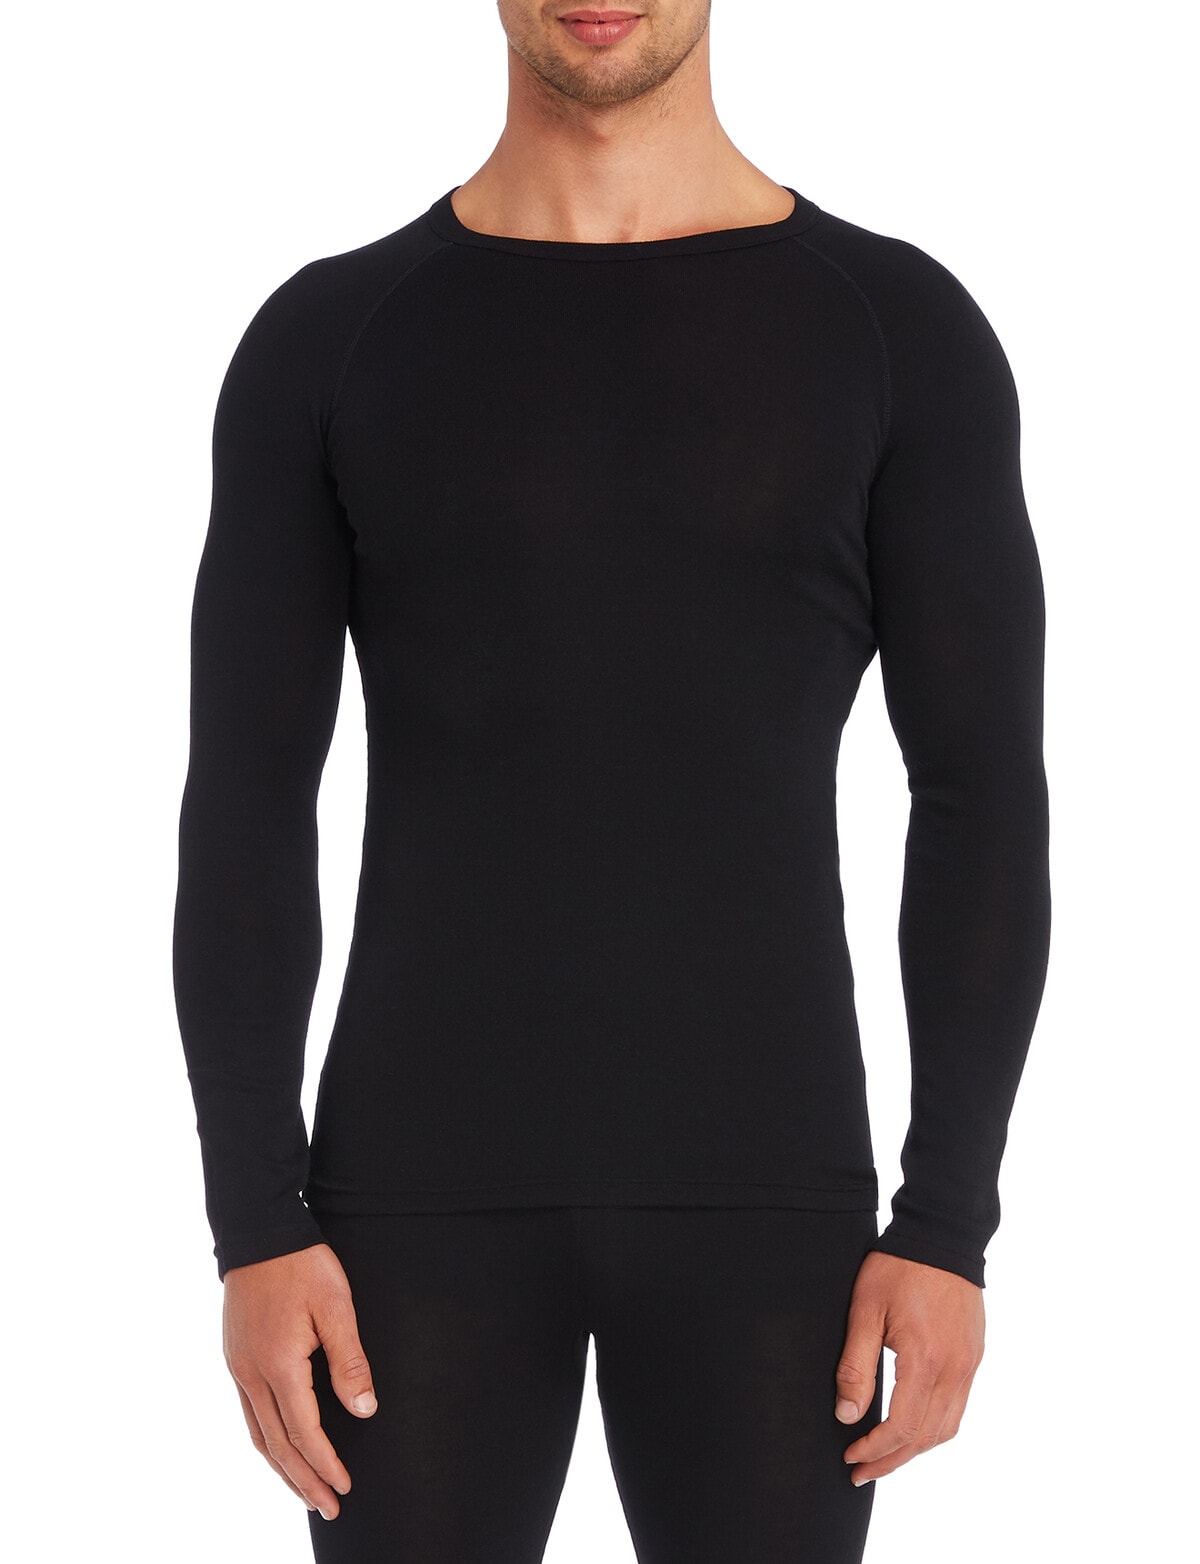 Superfit Poly Viscose Long-Sleeve Thermal Top, Black - Thermals